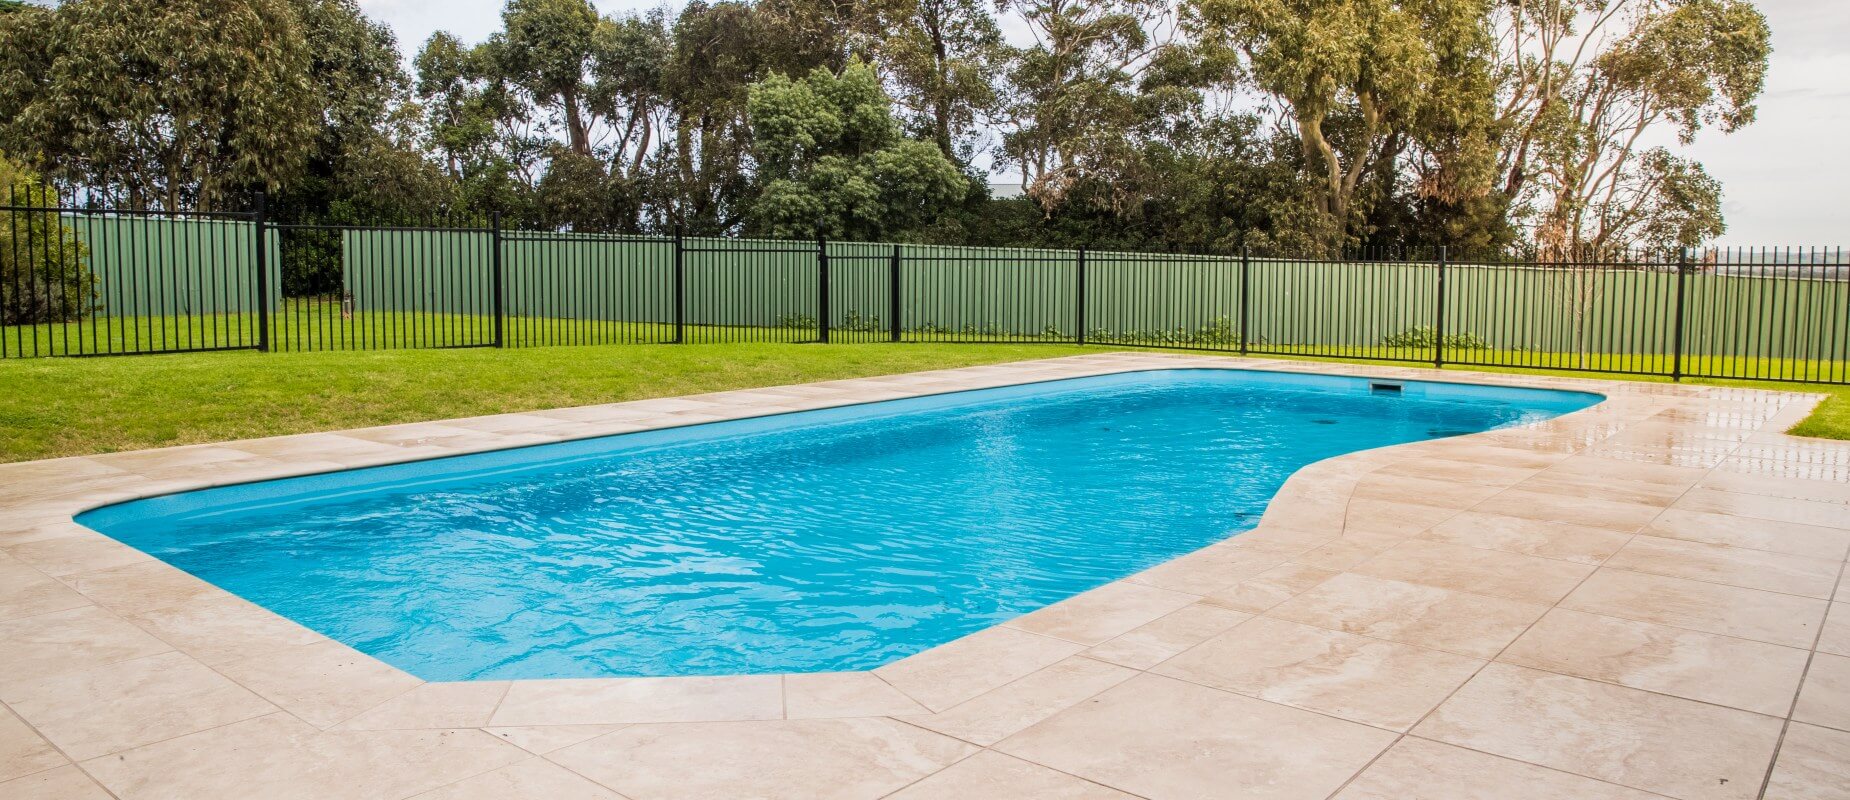 Family-Friendly Riviera Swimming Pool | Compass Pools ...